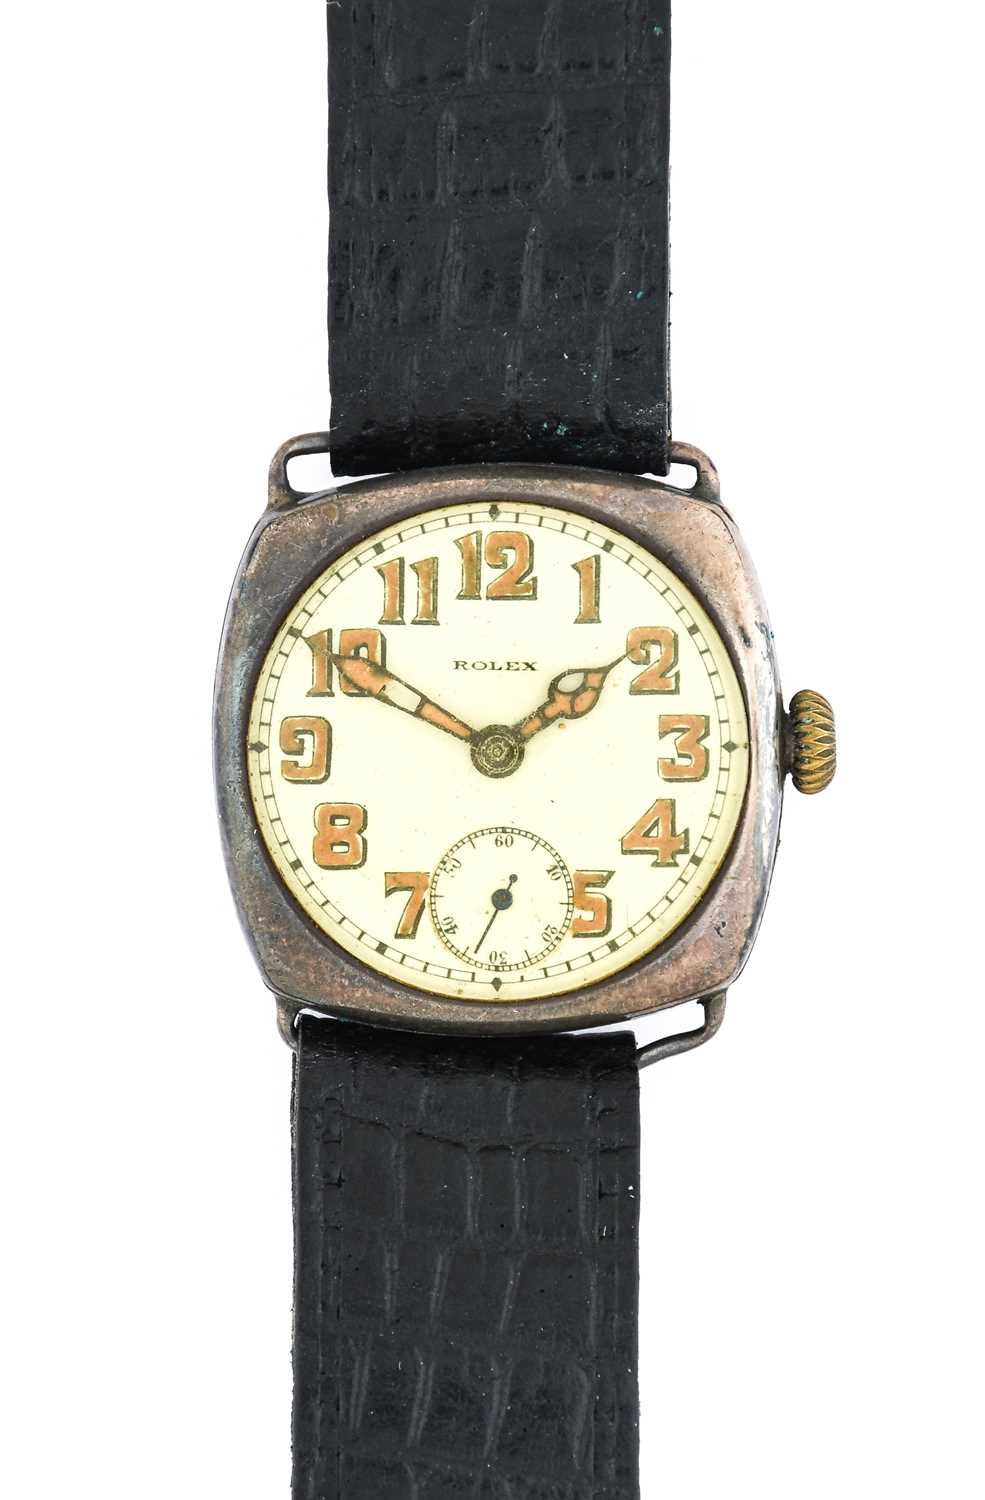 Rolex: An Early Silver Enamel Dial Wristwatch, signed Rolex, 1917, manual wound lever movement